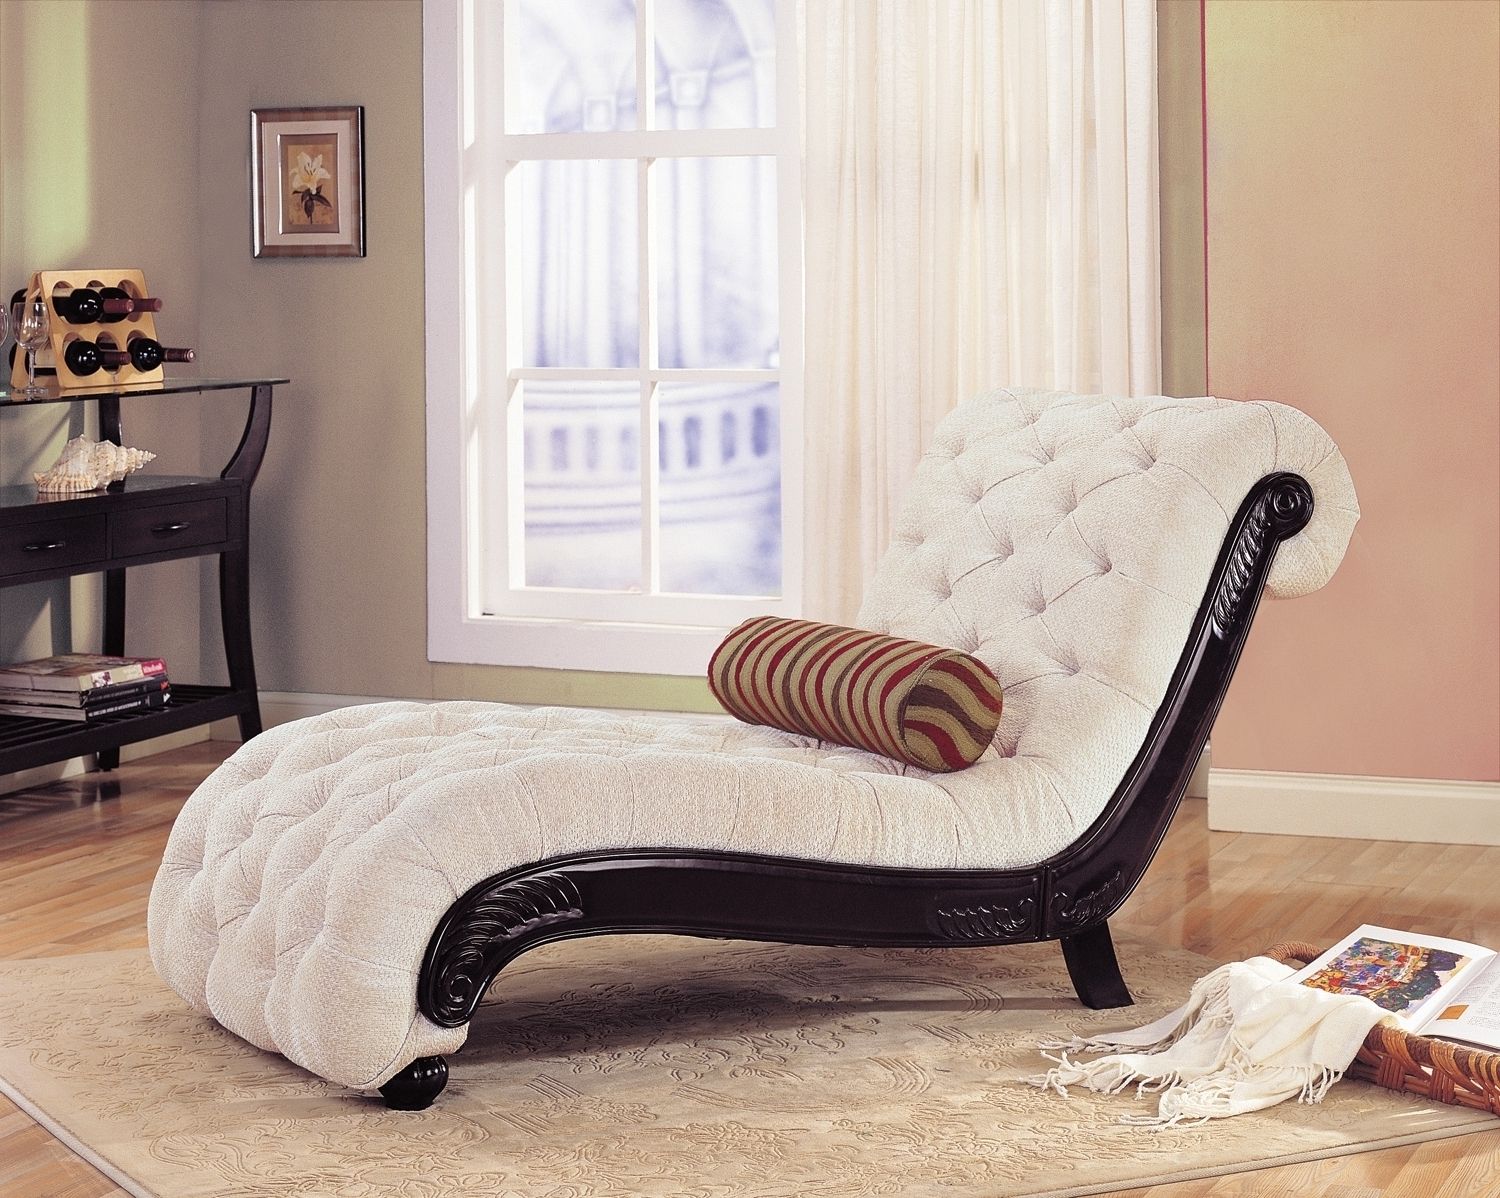 Cream Chaise Lounges Within Popular Classy Living Room Chaise Lounges Design For Your Interior Ideas (View 10 of 15)